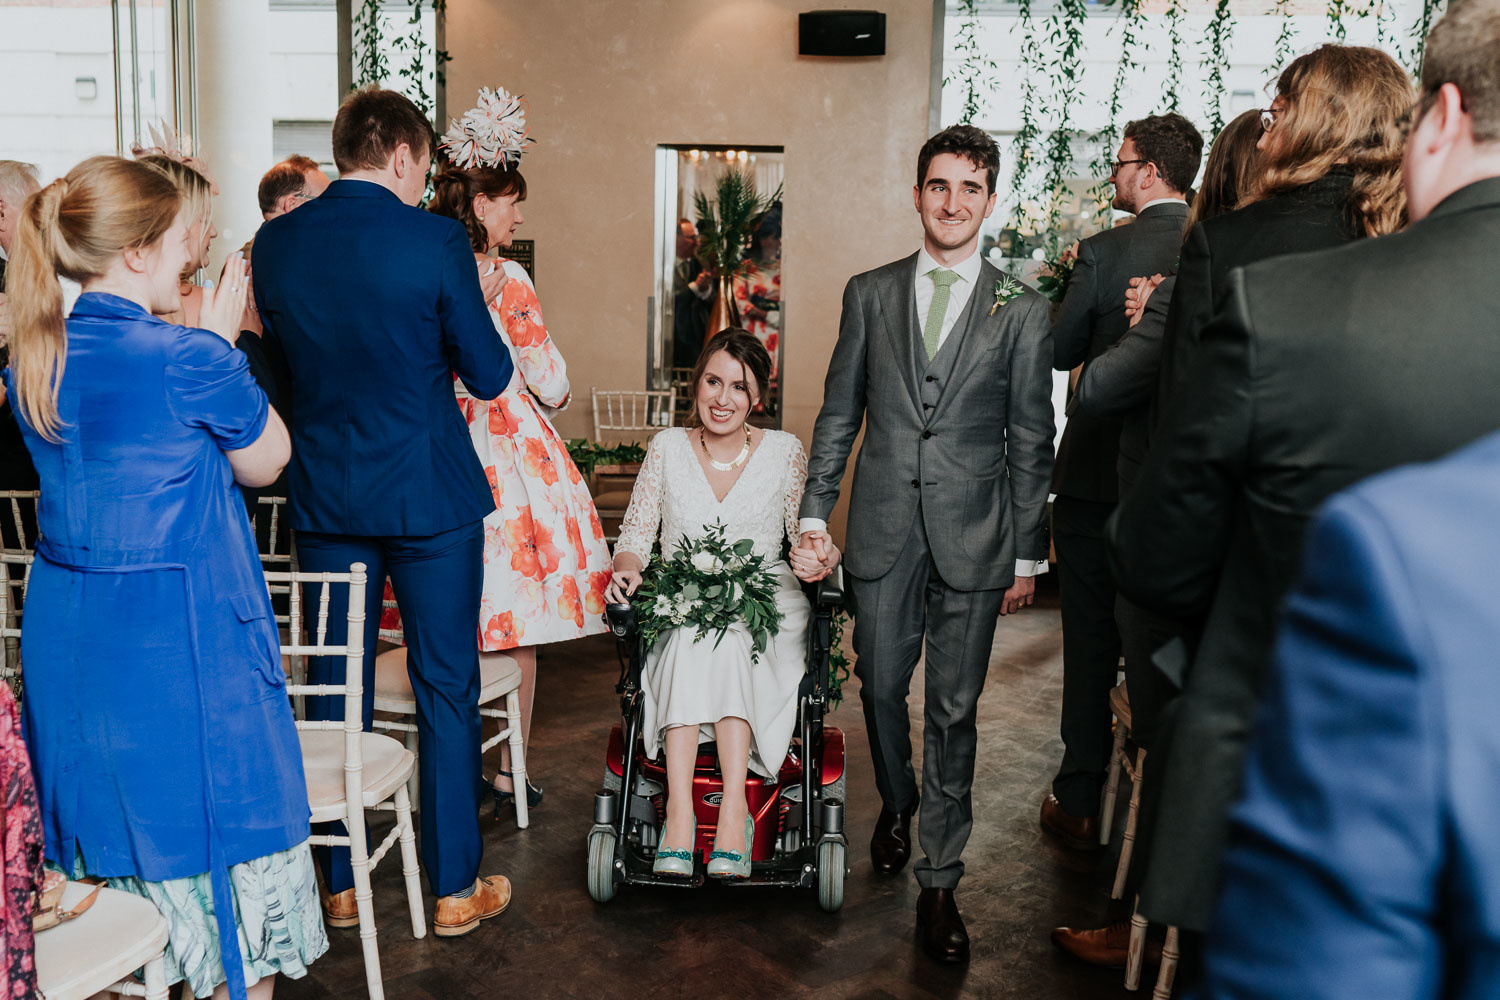 disabled bride and groom exiting ceremony together